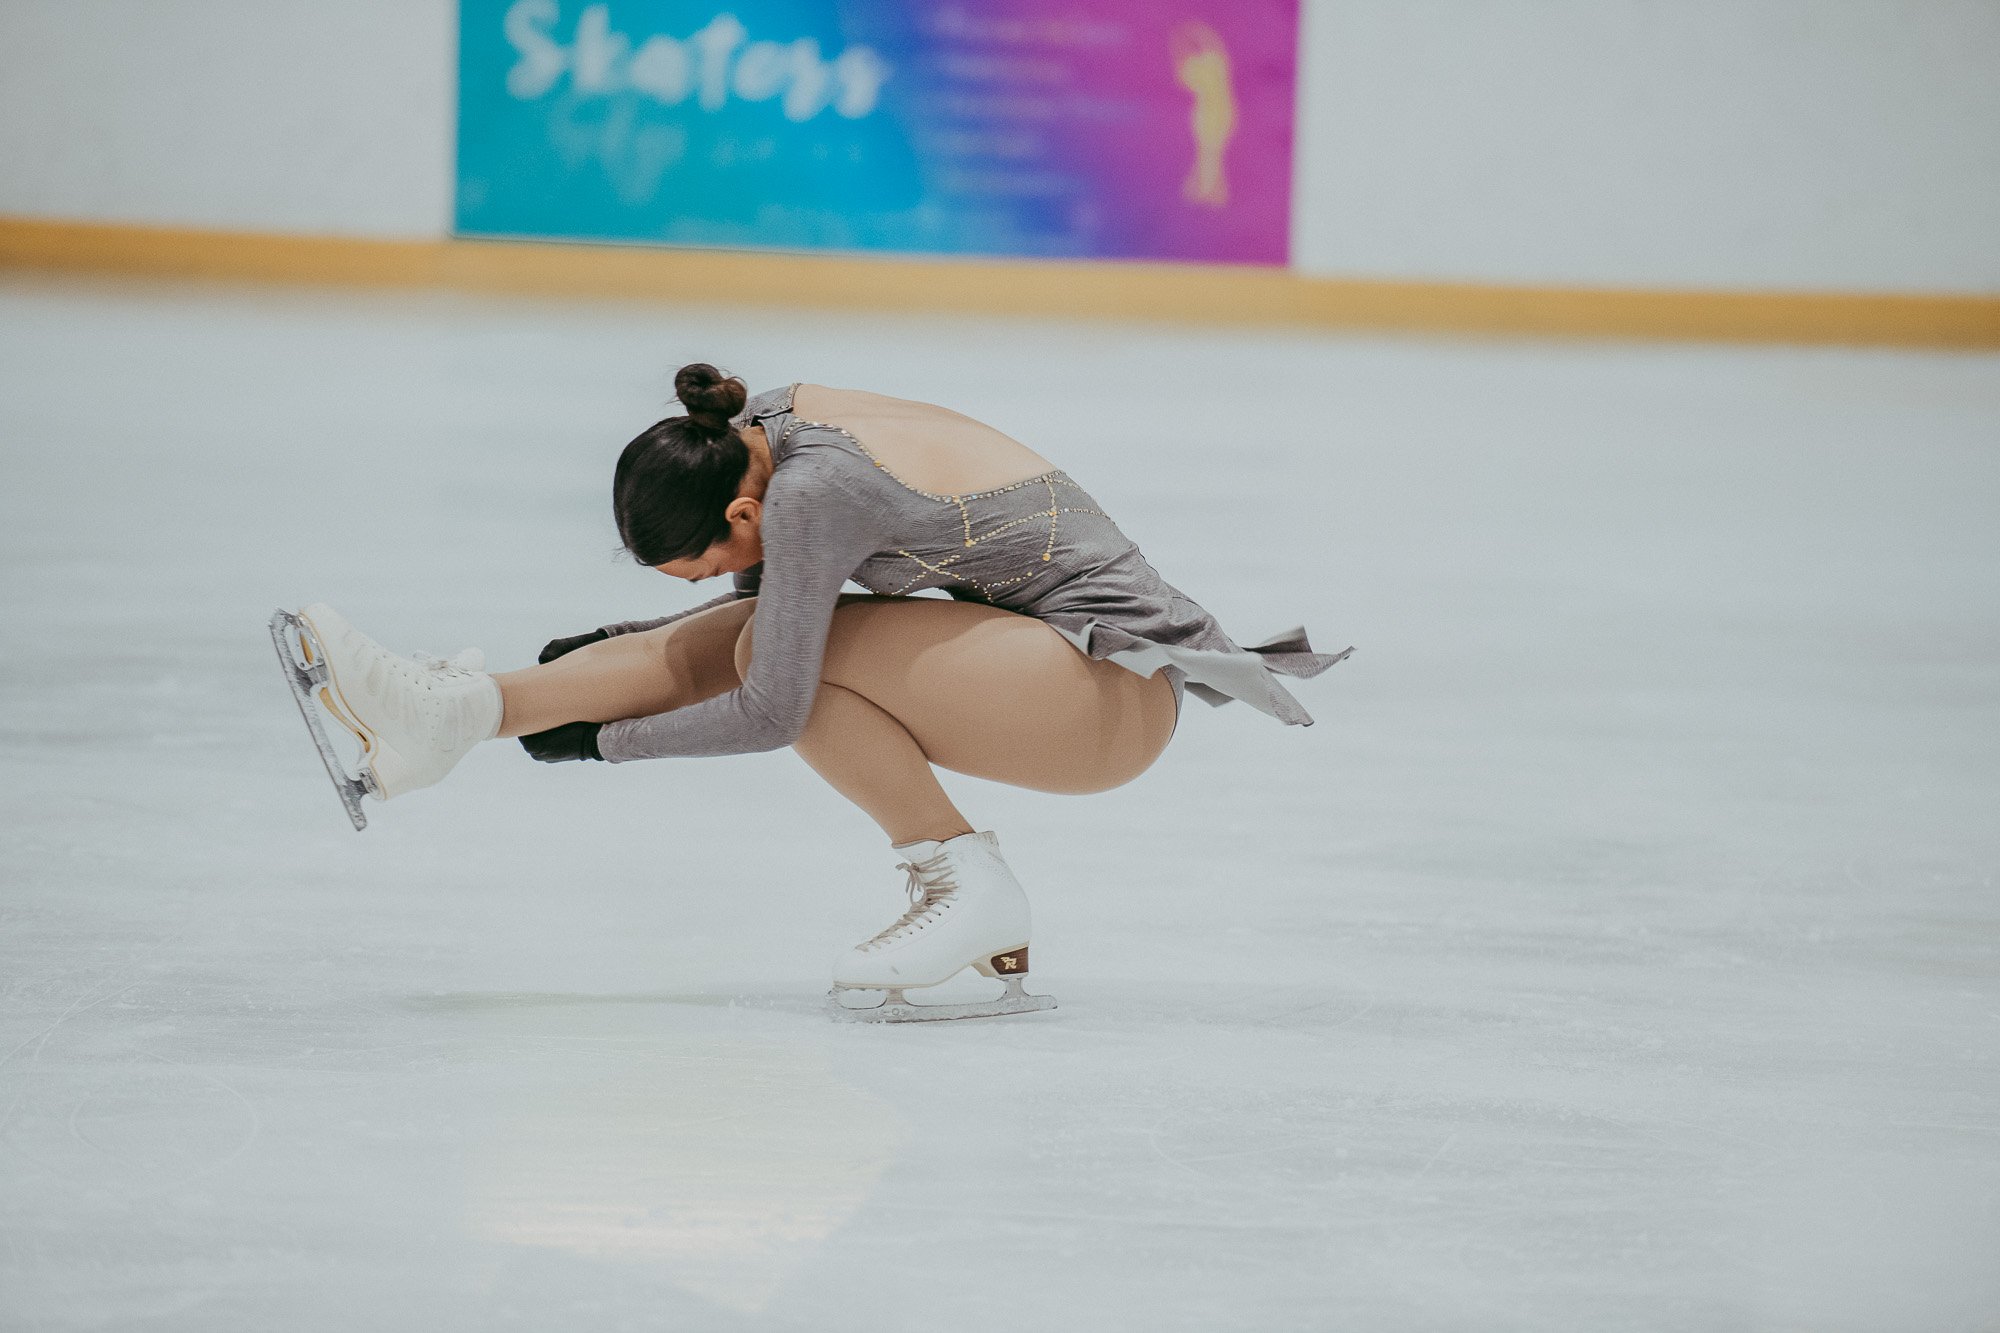 Nationals-ice skating_by_Levien-21.jpg